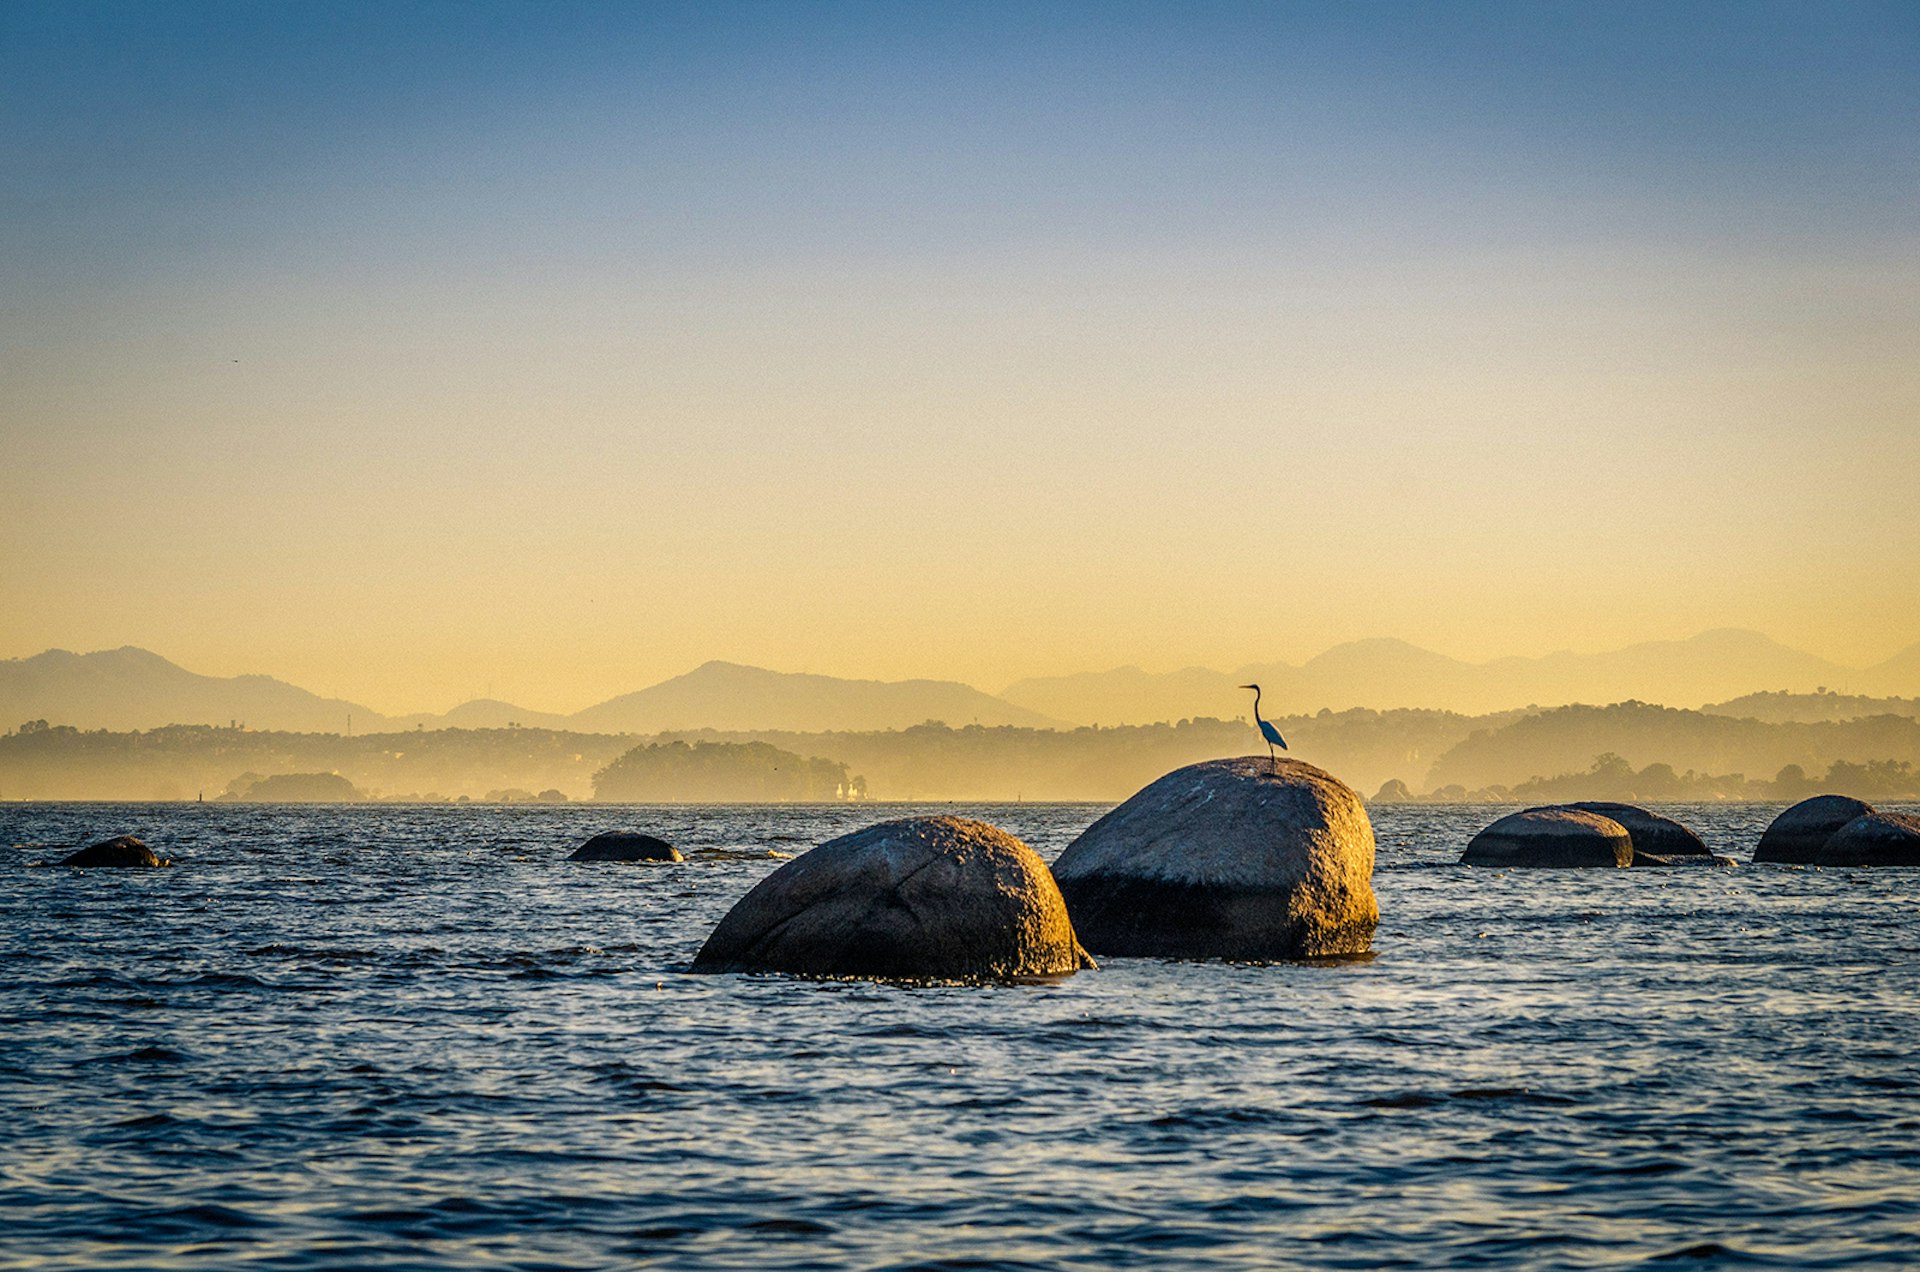 A view of the Guanabara Bay with round rocks poking up through the water's surface. A heron stands on the biggest rock.